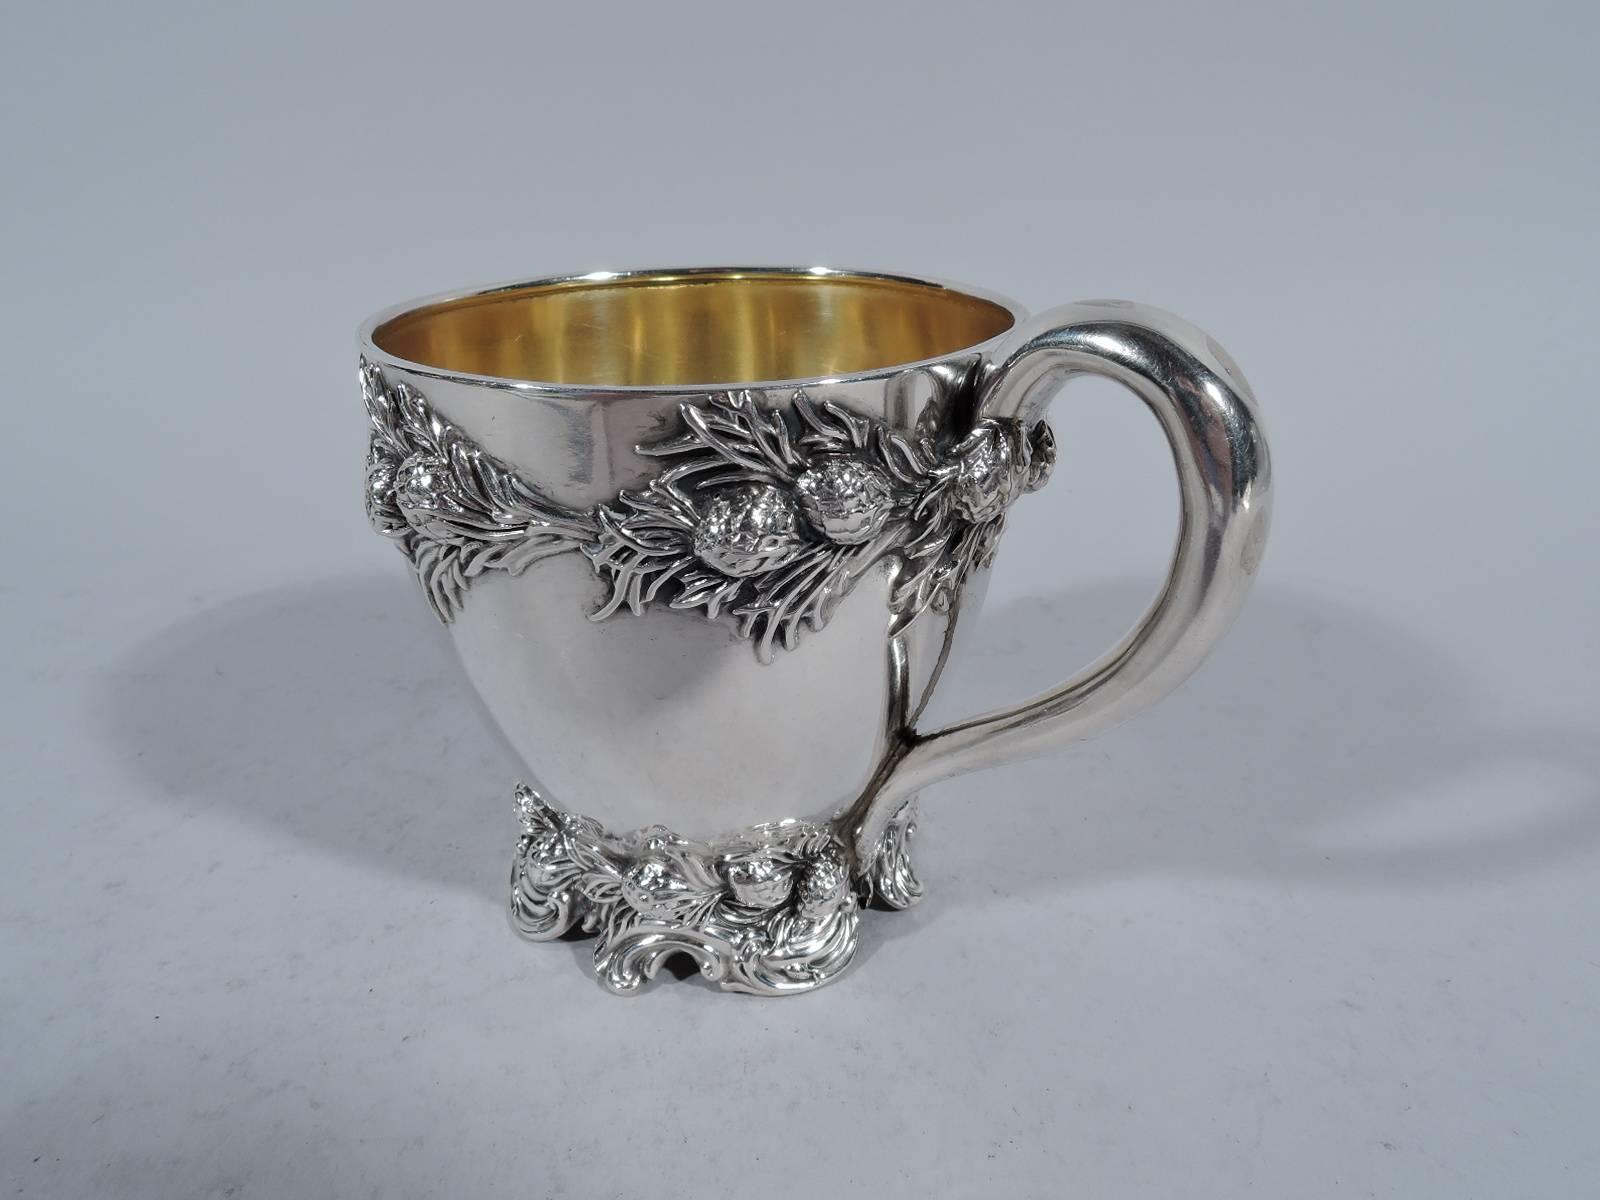 Aesthetic Movement Antique American Sterling Silver Baby Cup with Pinecones and Branches